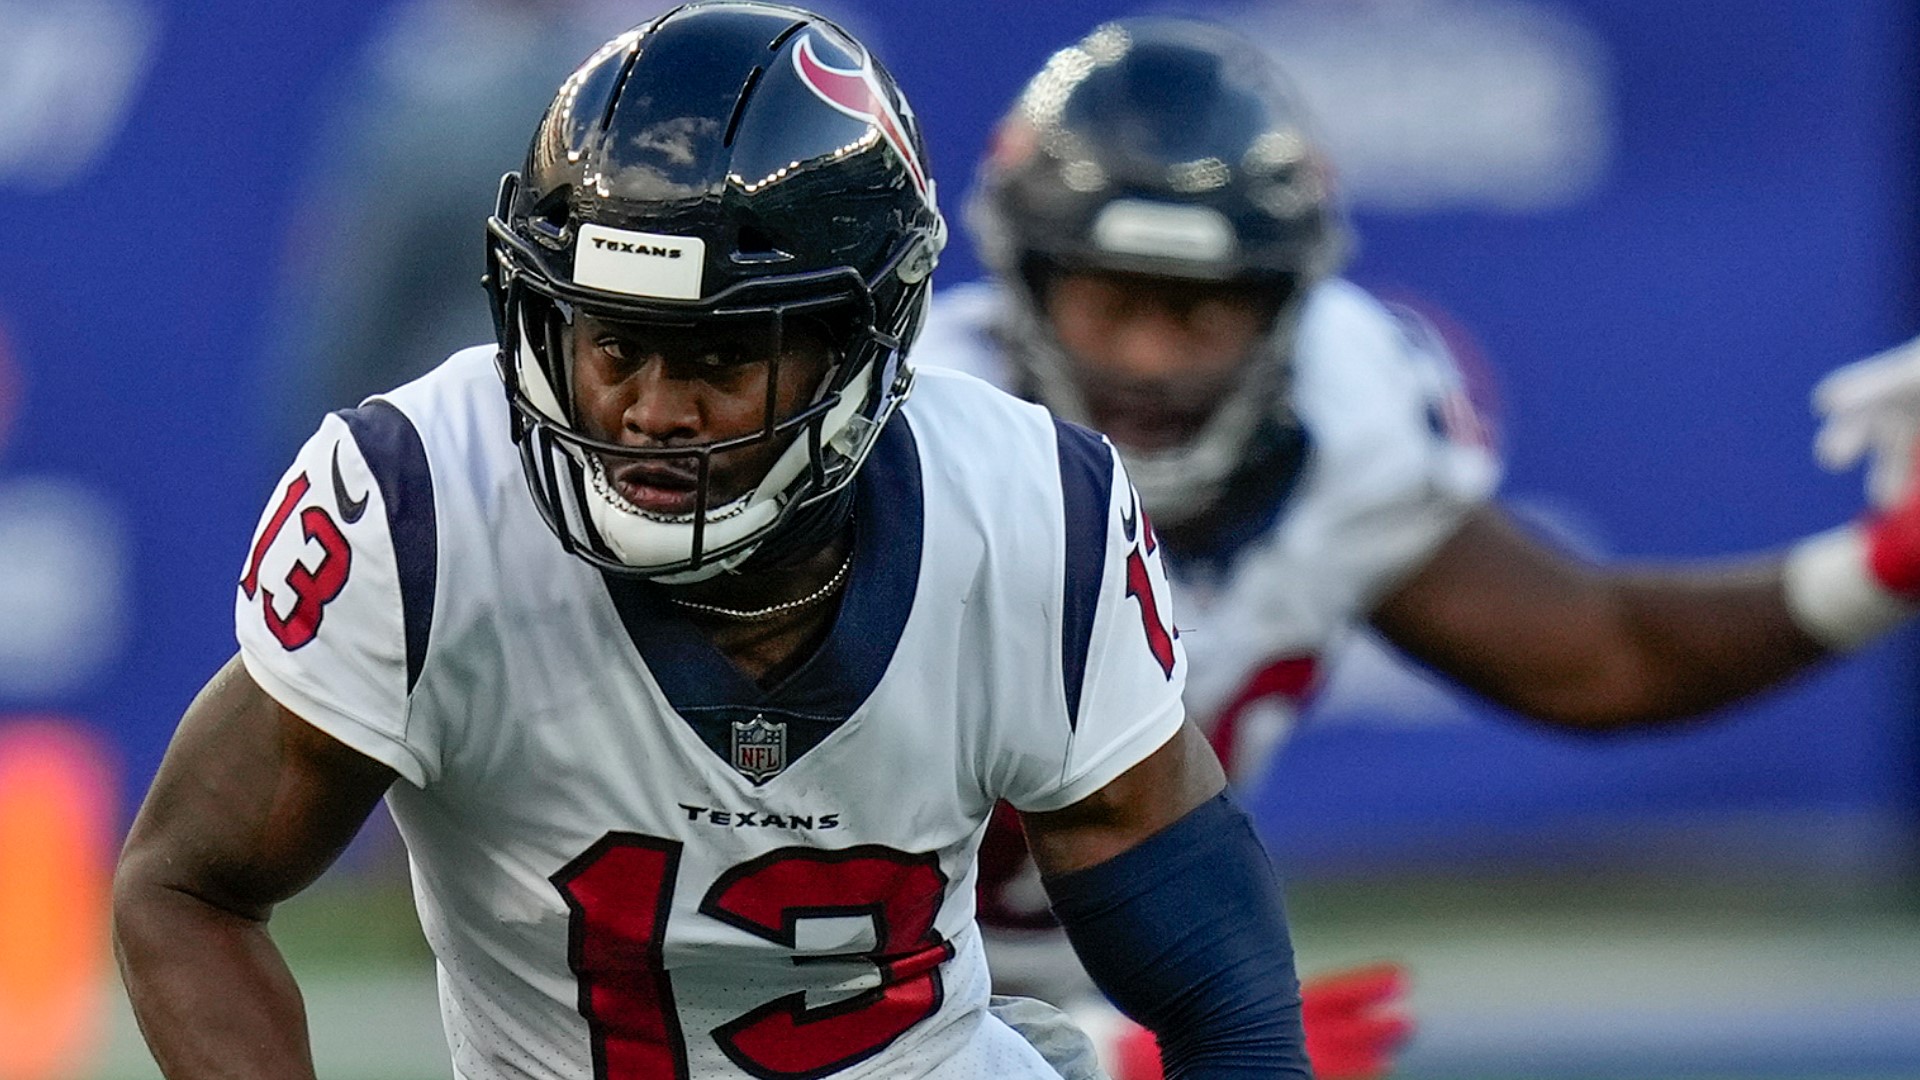 Cooks was listed as inactive last week against the Philadelphia Eagles with a wrist injury and a personal issue, according to the Texans.